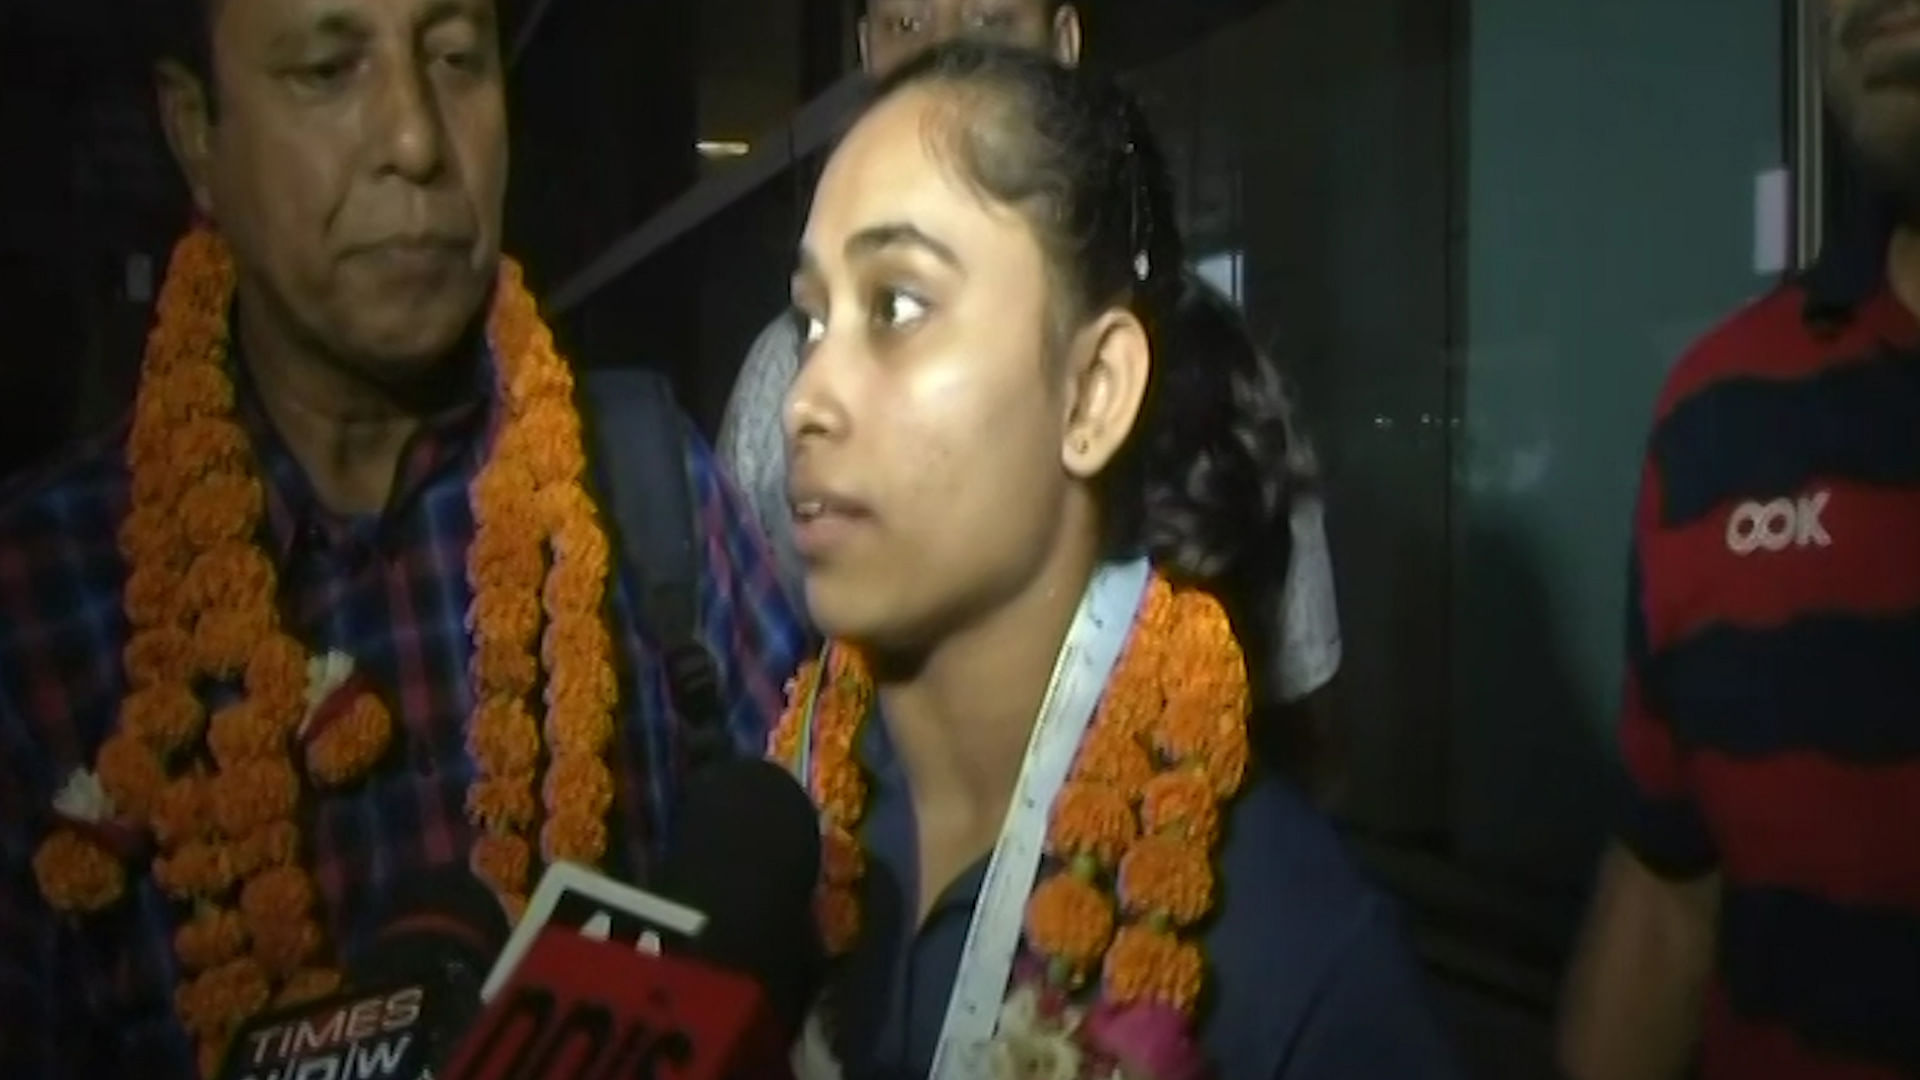 Dipa Karmakar speaks to the media upon her return to India after winning gold medal in the vault event at the Artistic Gymnastics World Challenge Cup.